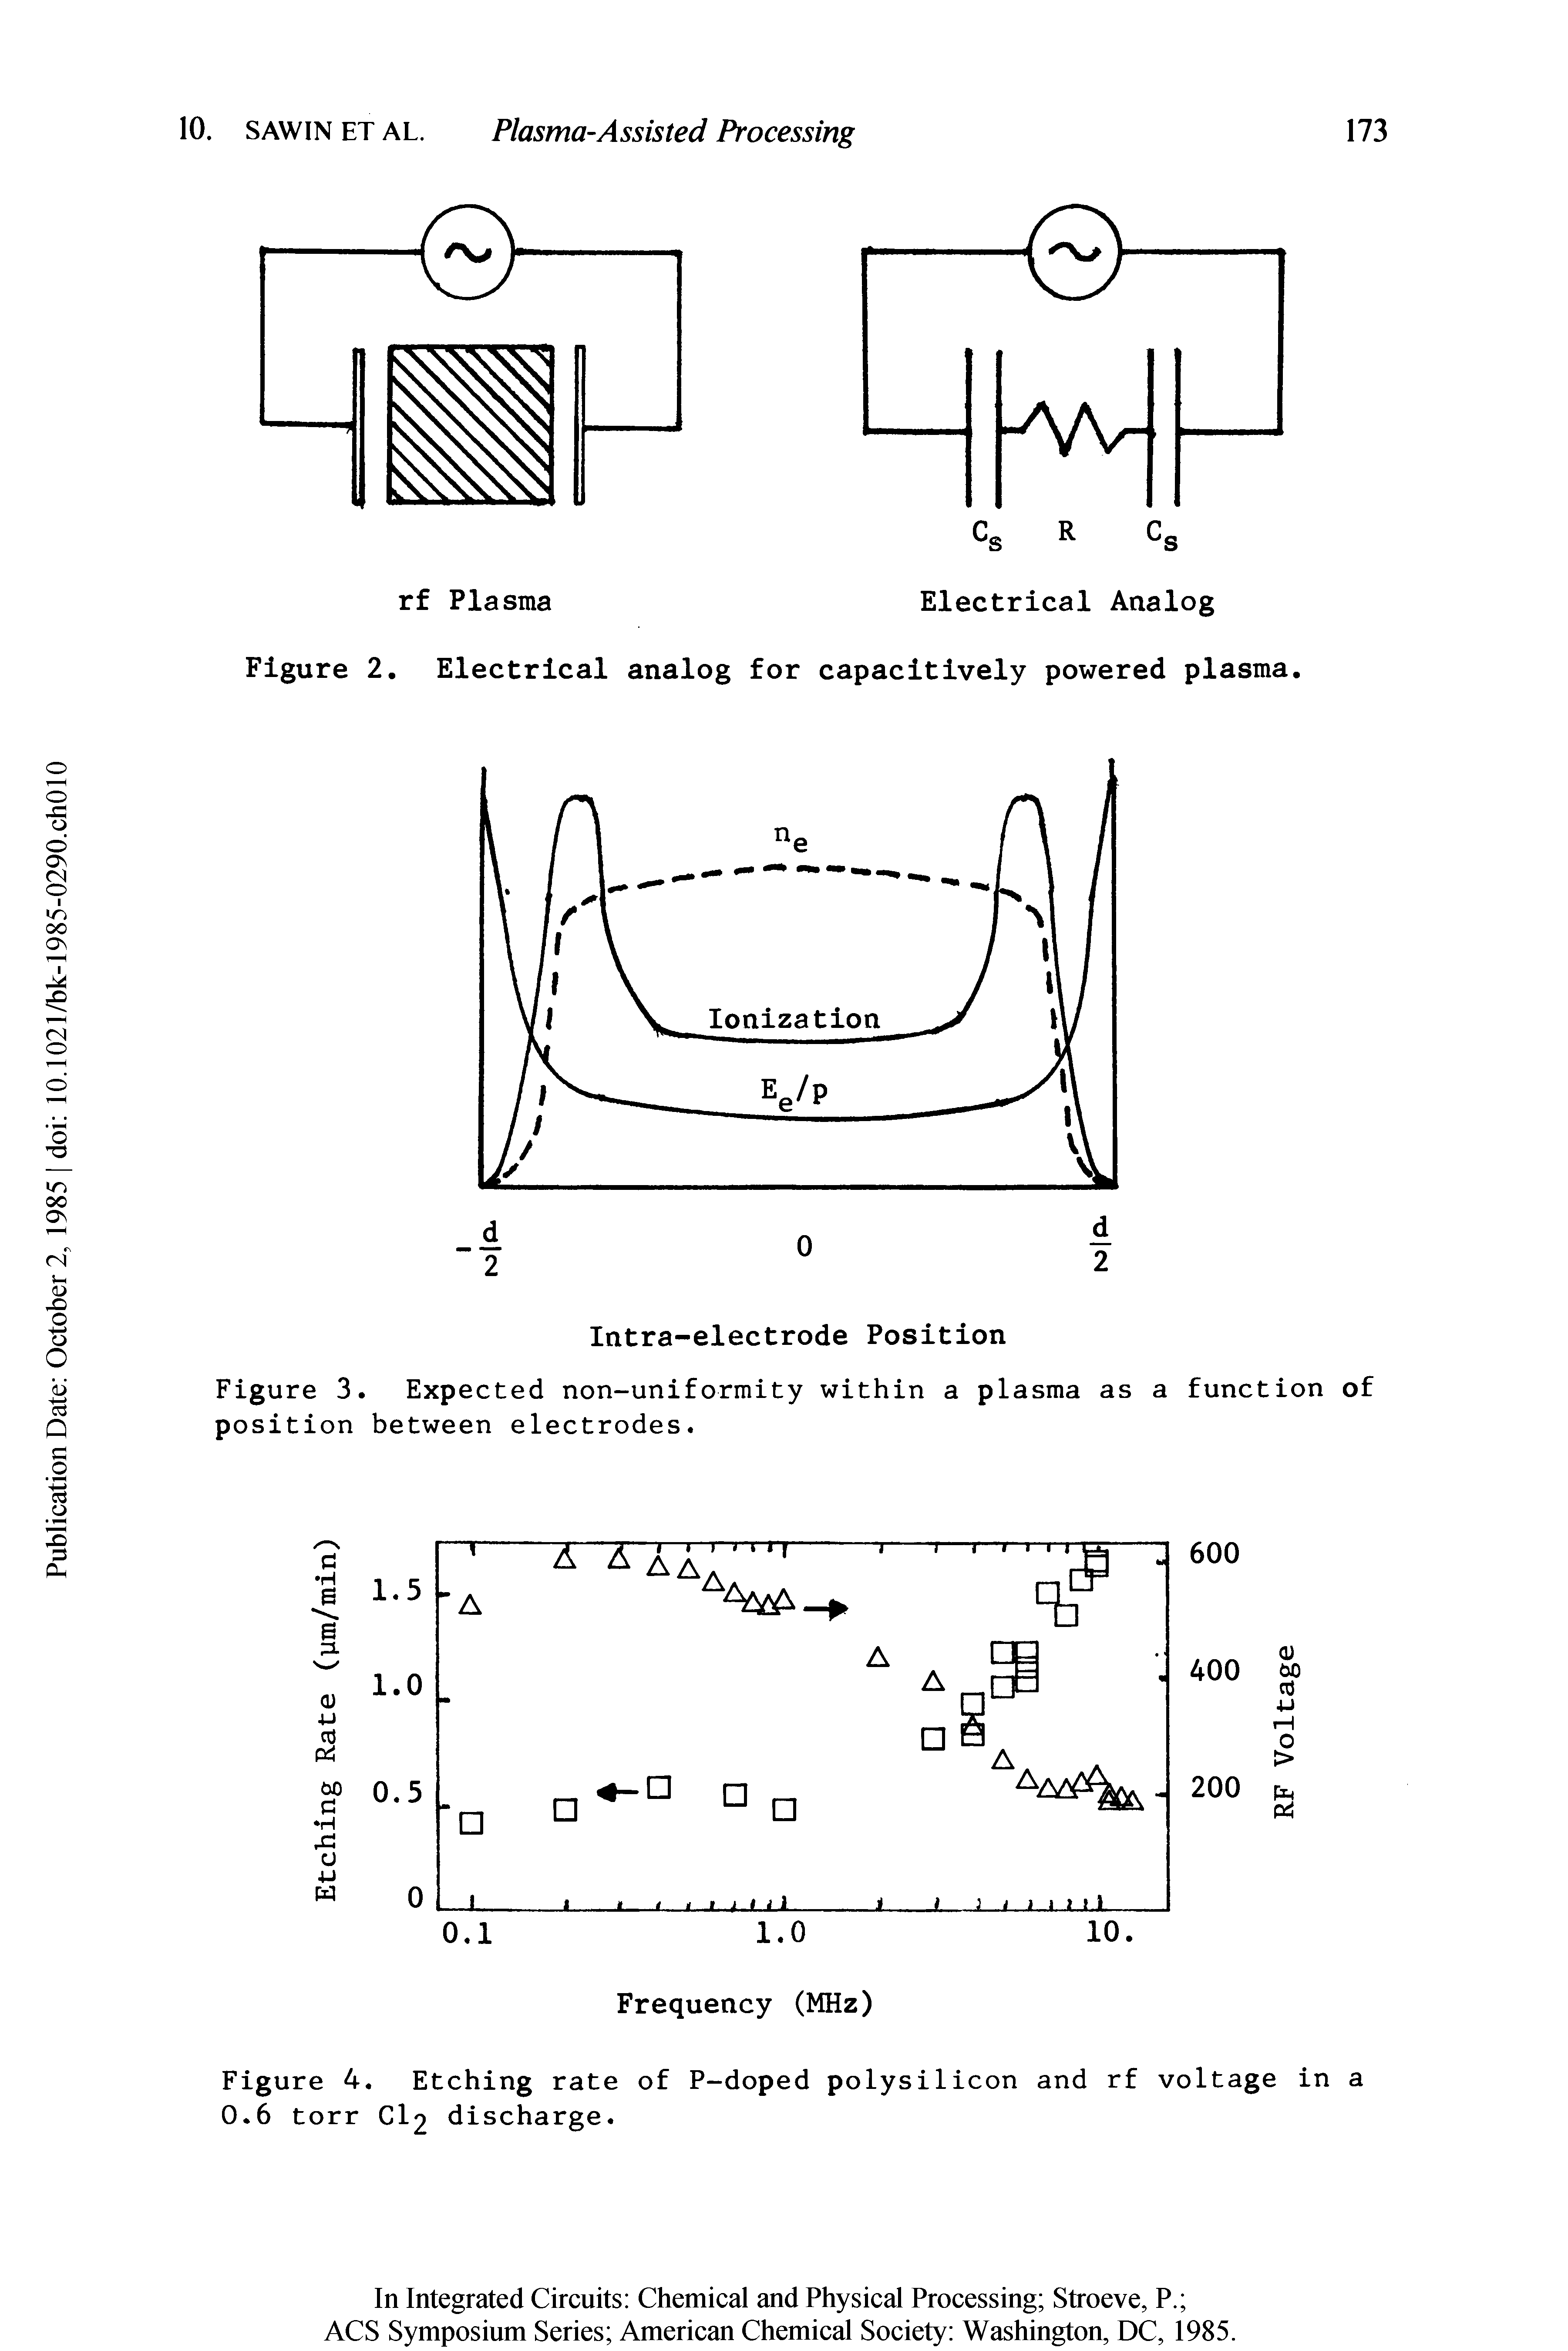 Figure 2. Electrical analog for capacitively powered plasma.